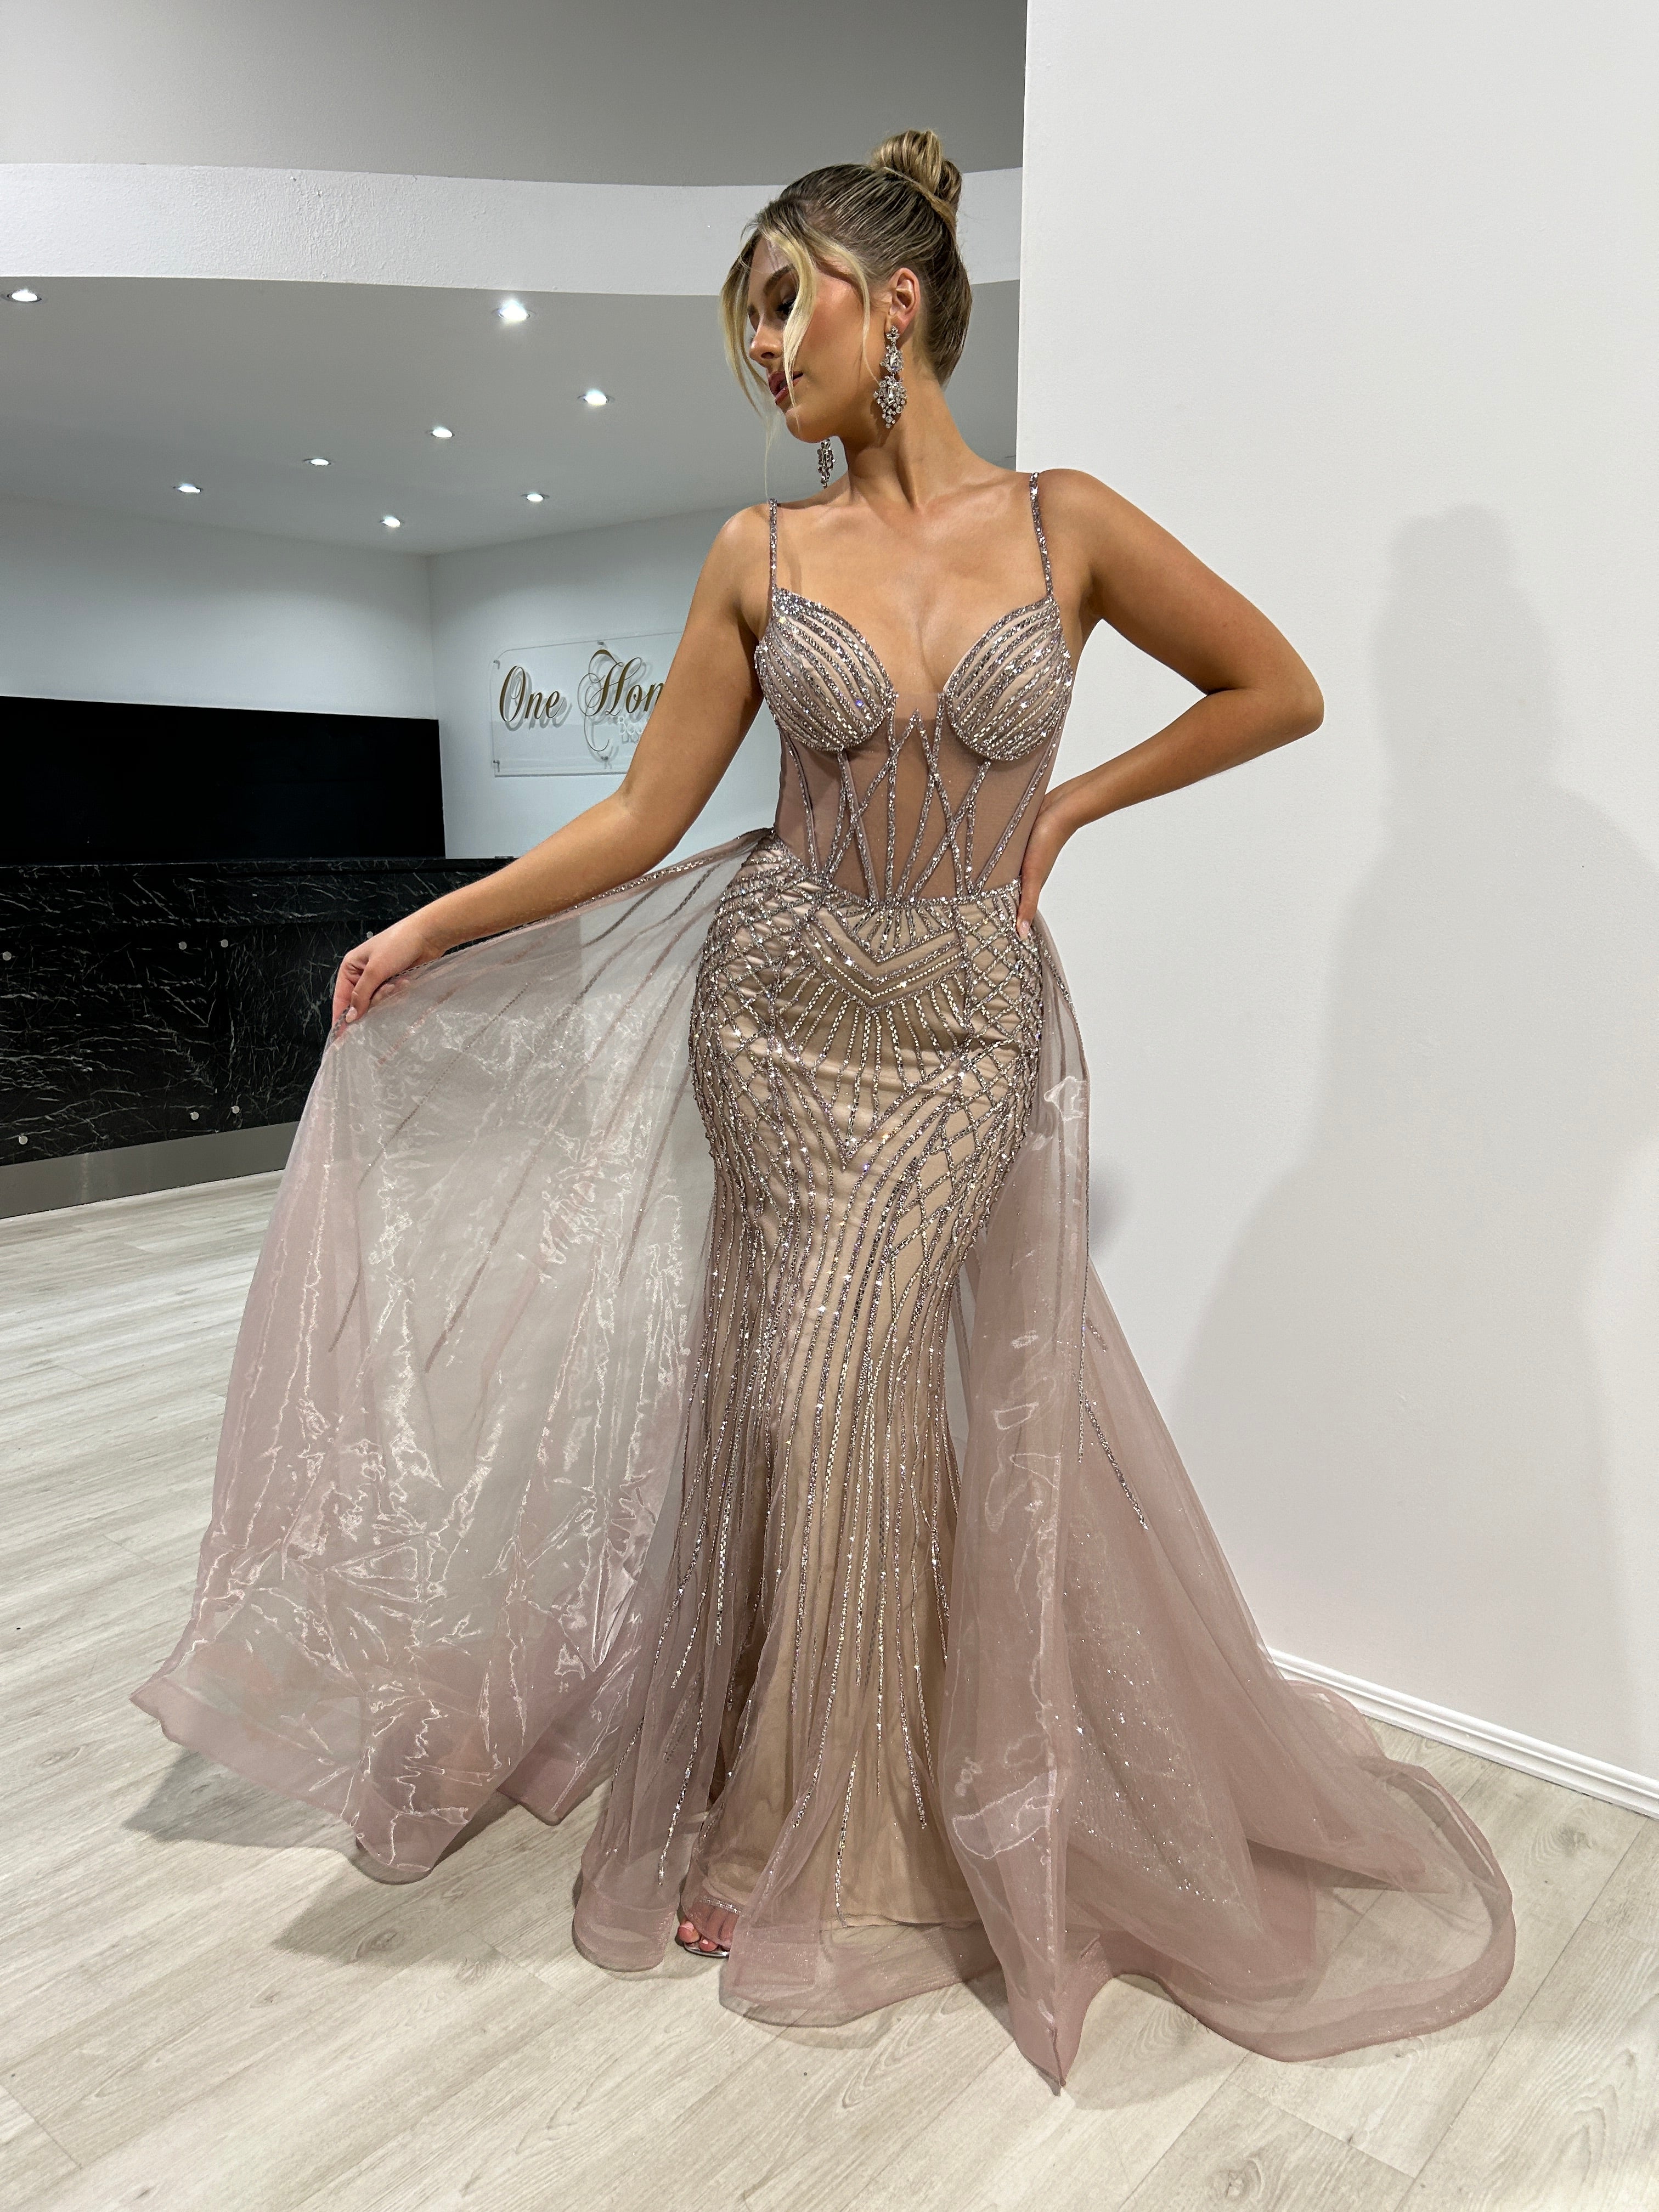 Champagne Designer Dress for Any Occasion | NewYorkDress